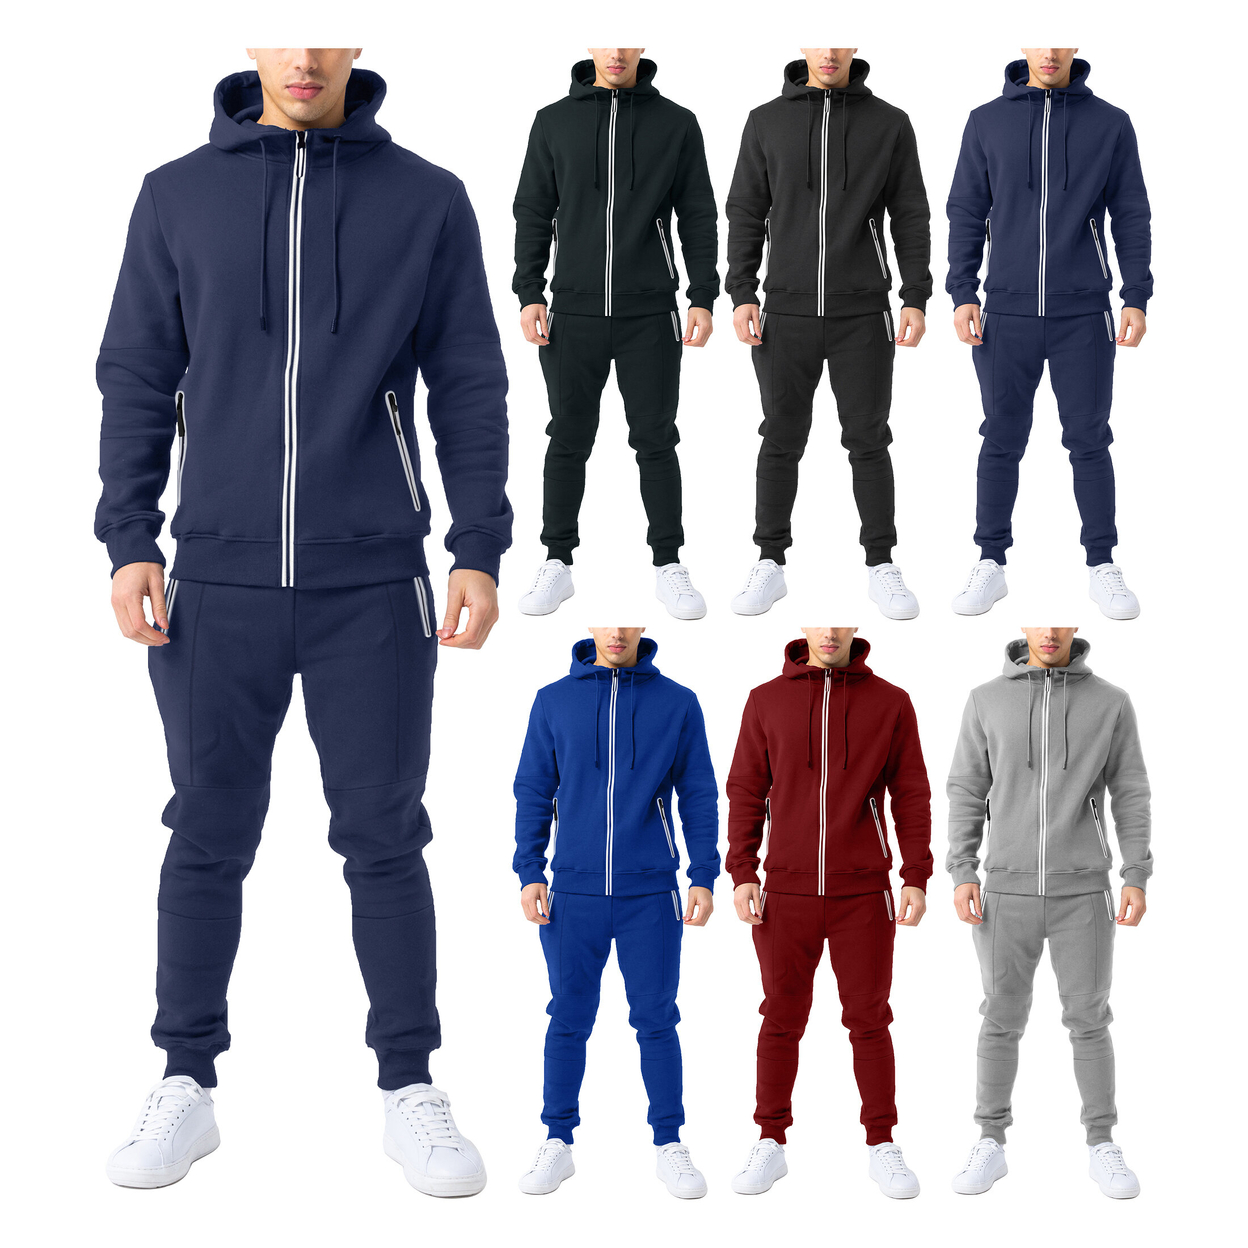 2-Pack: Men's Cozy Slim Fit Active Athletic Full Zip Hoodie And Jogger Tracksuit - Blue & Blue, Medium